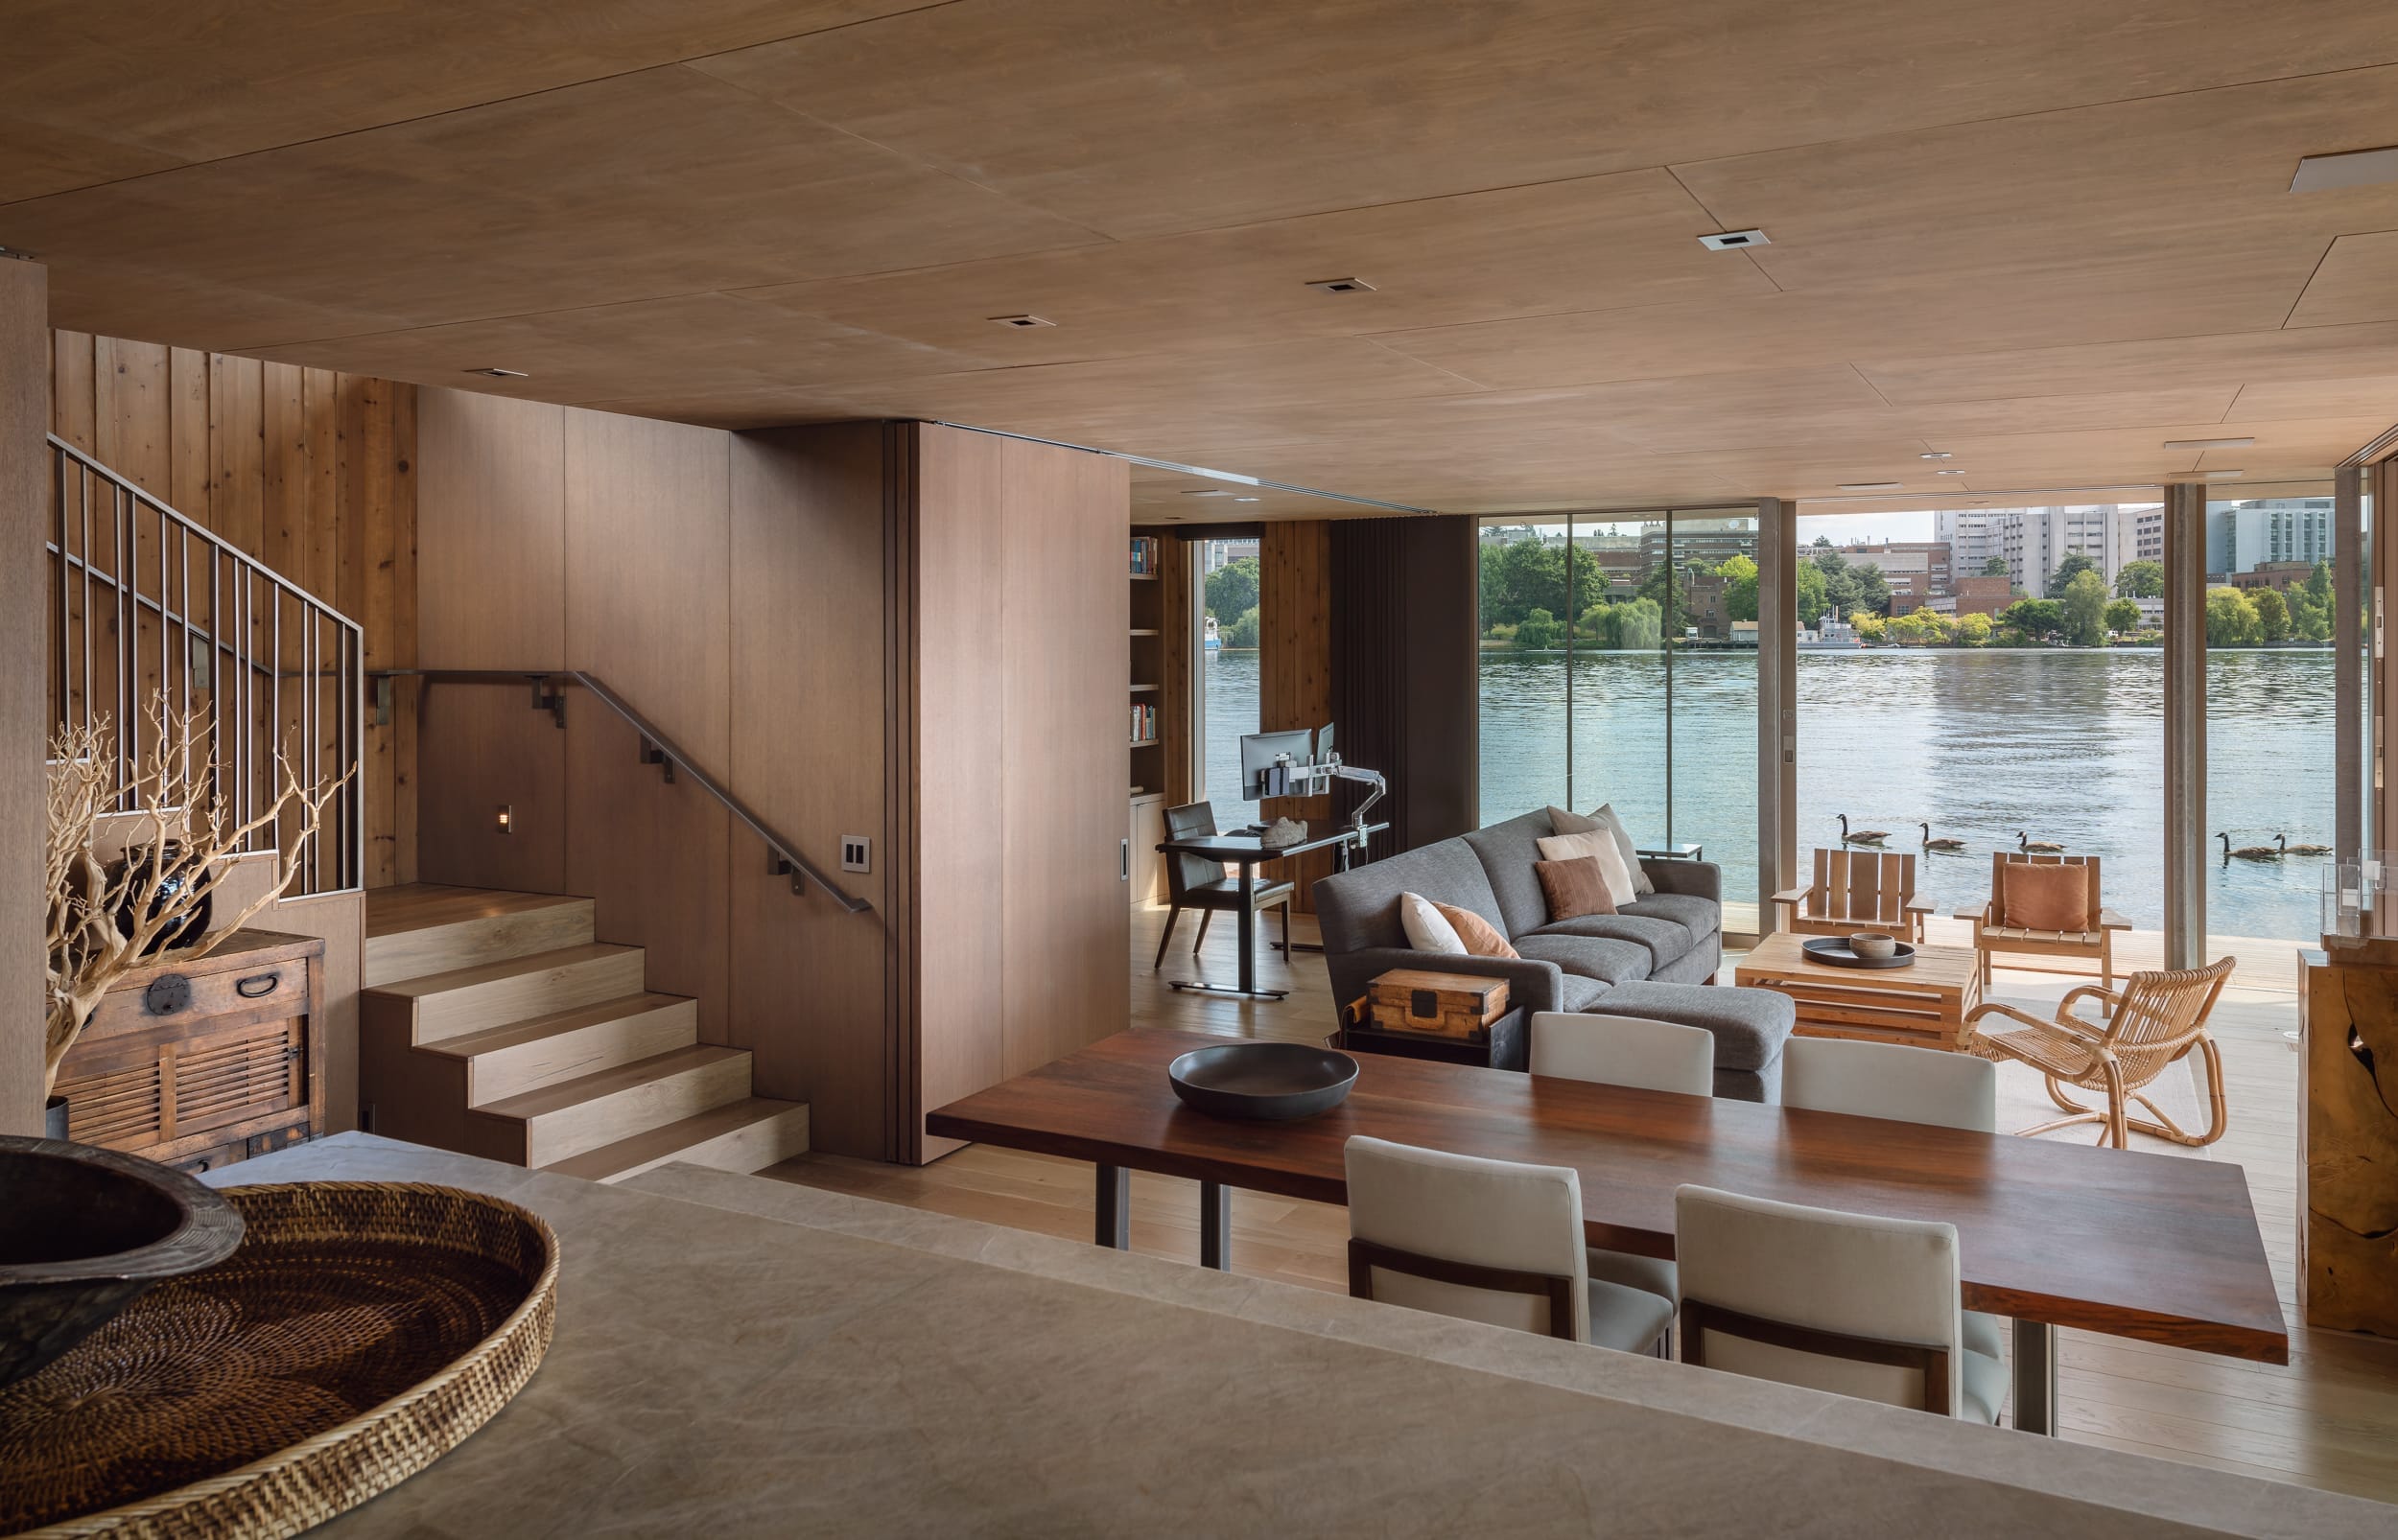 A modern living room with stairs and a view of the river, designed by a carpenter.